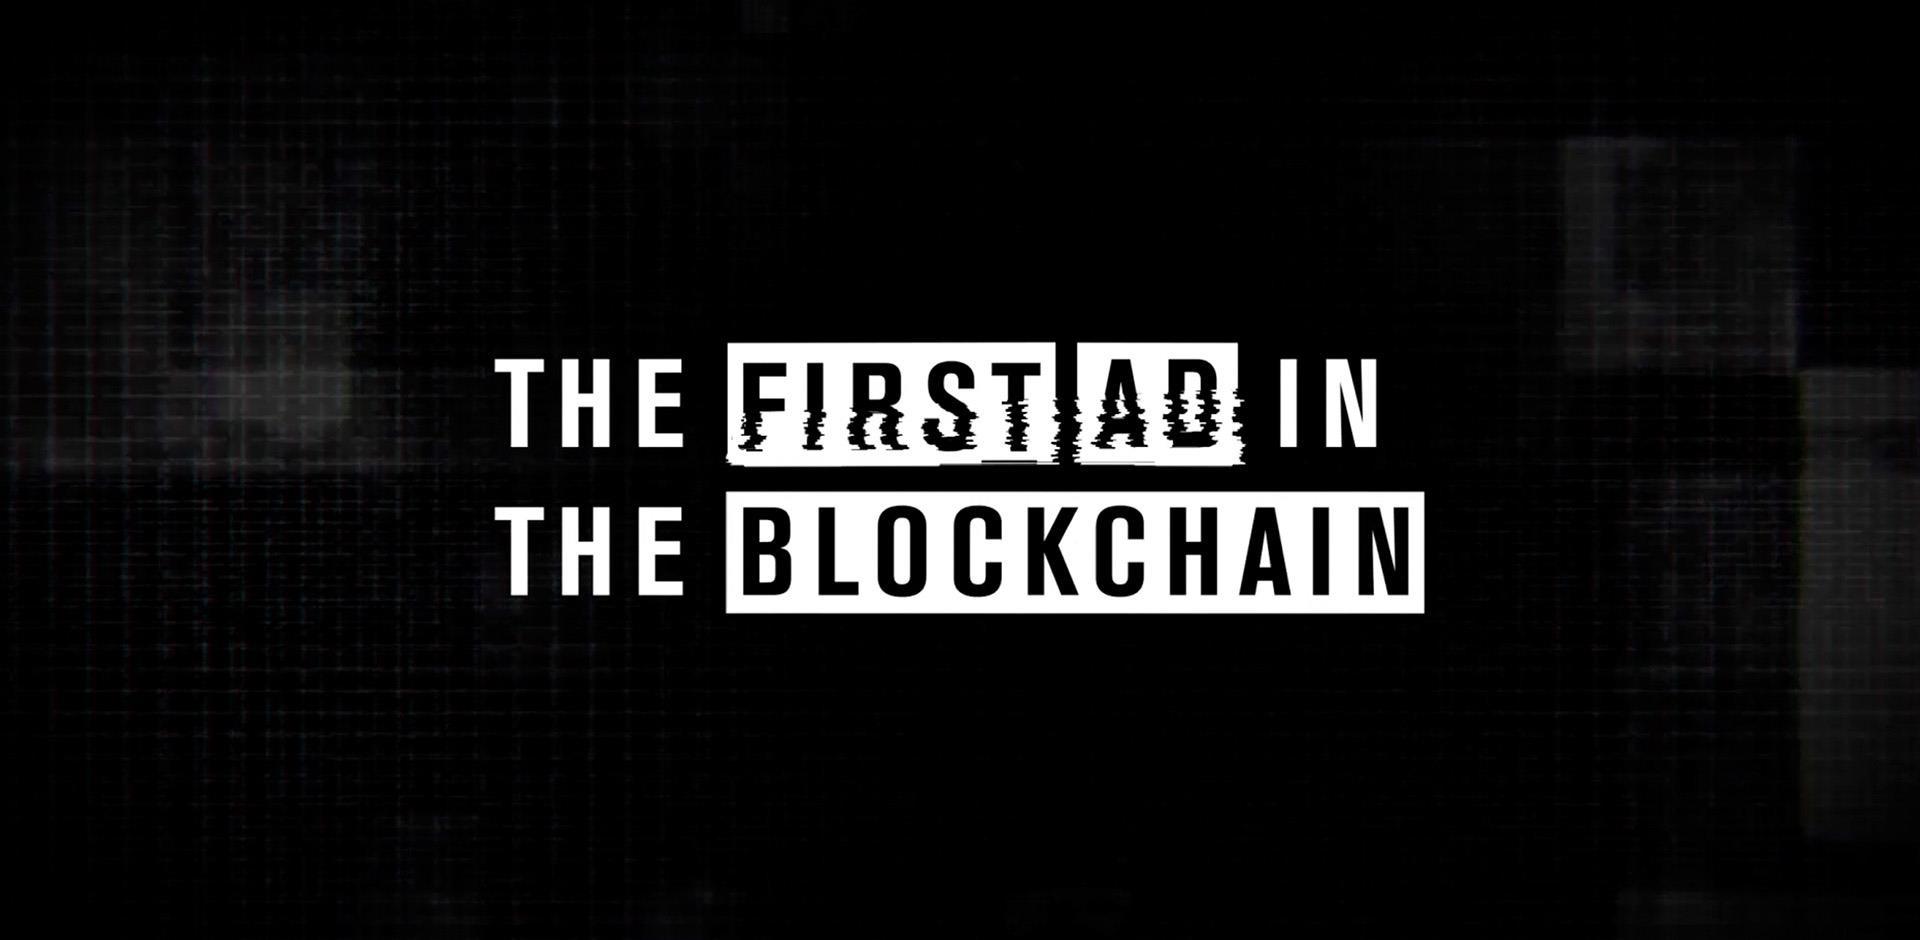 The First Ad In the Blockchain